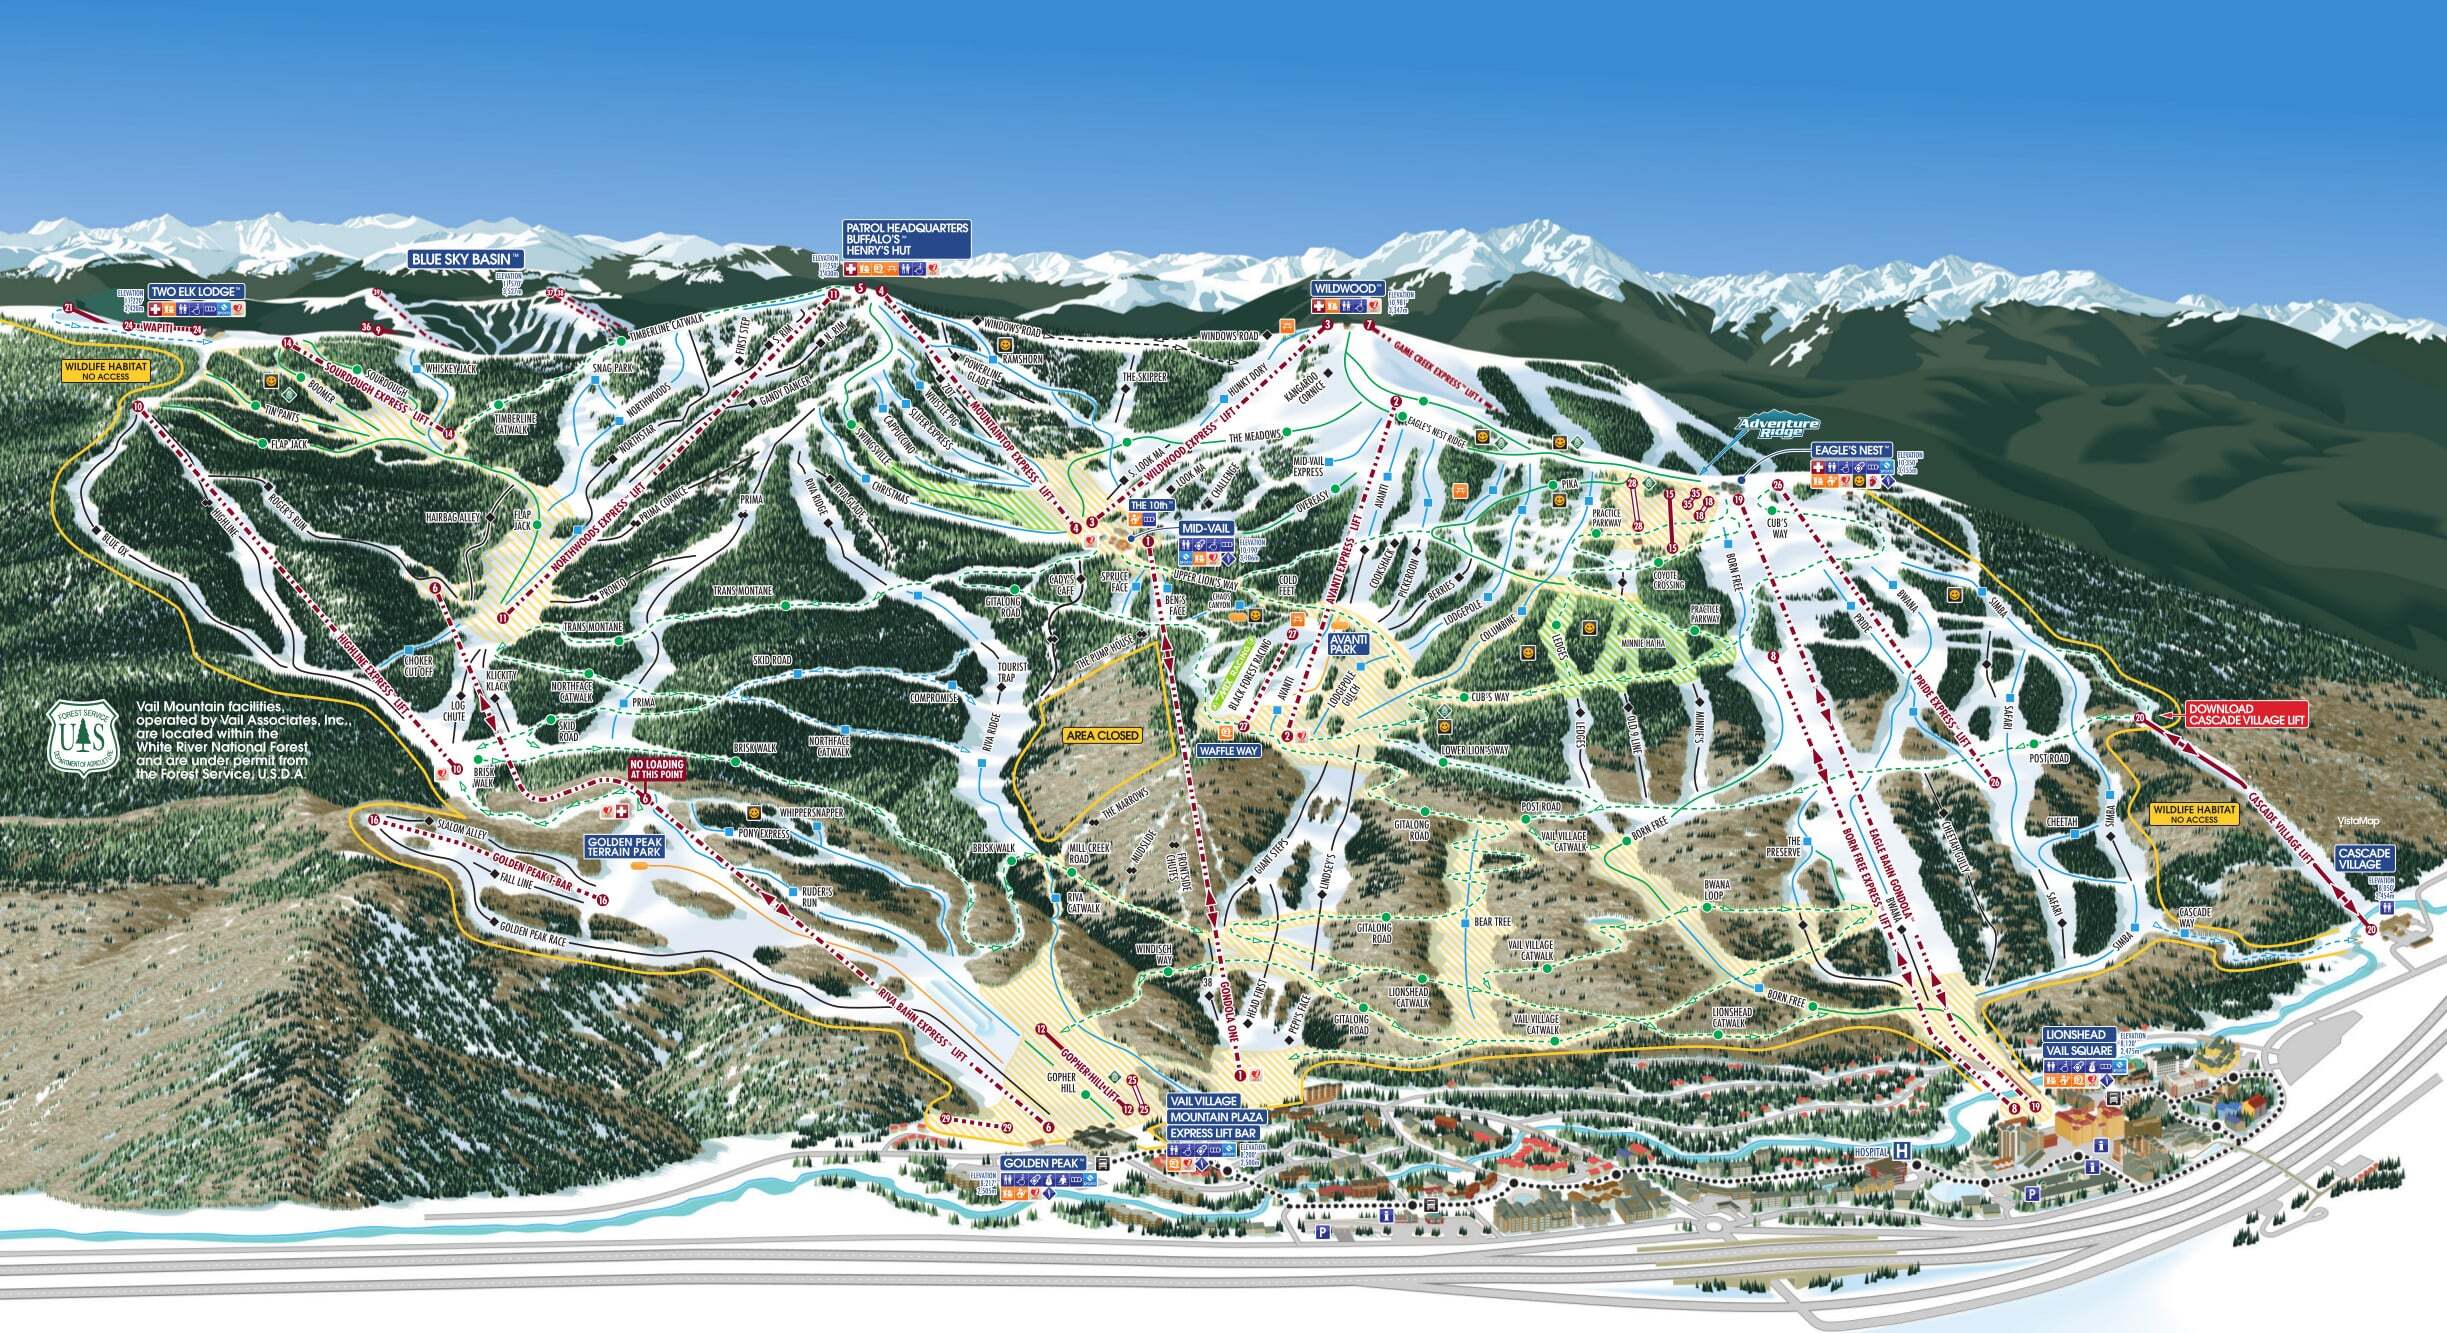 Click the map to view a full-sized version of the trails at Vail ski resort.